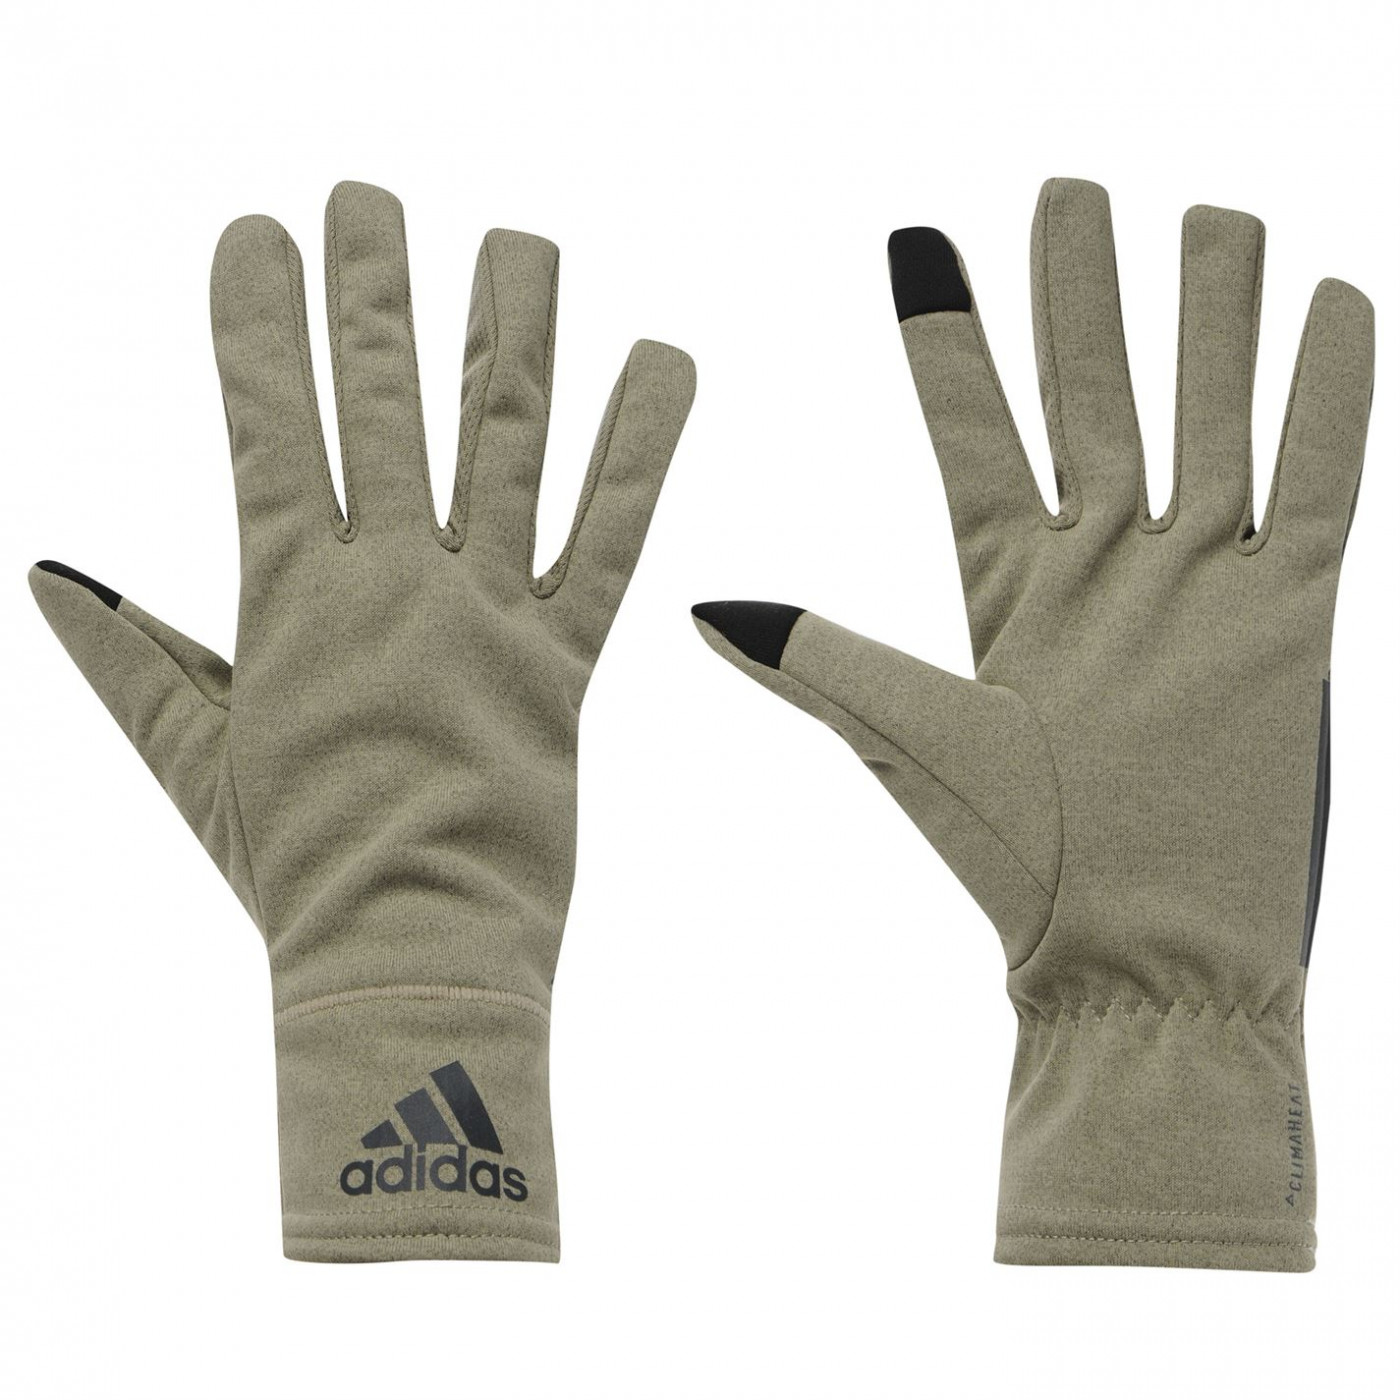 adidas climaheat gloves